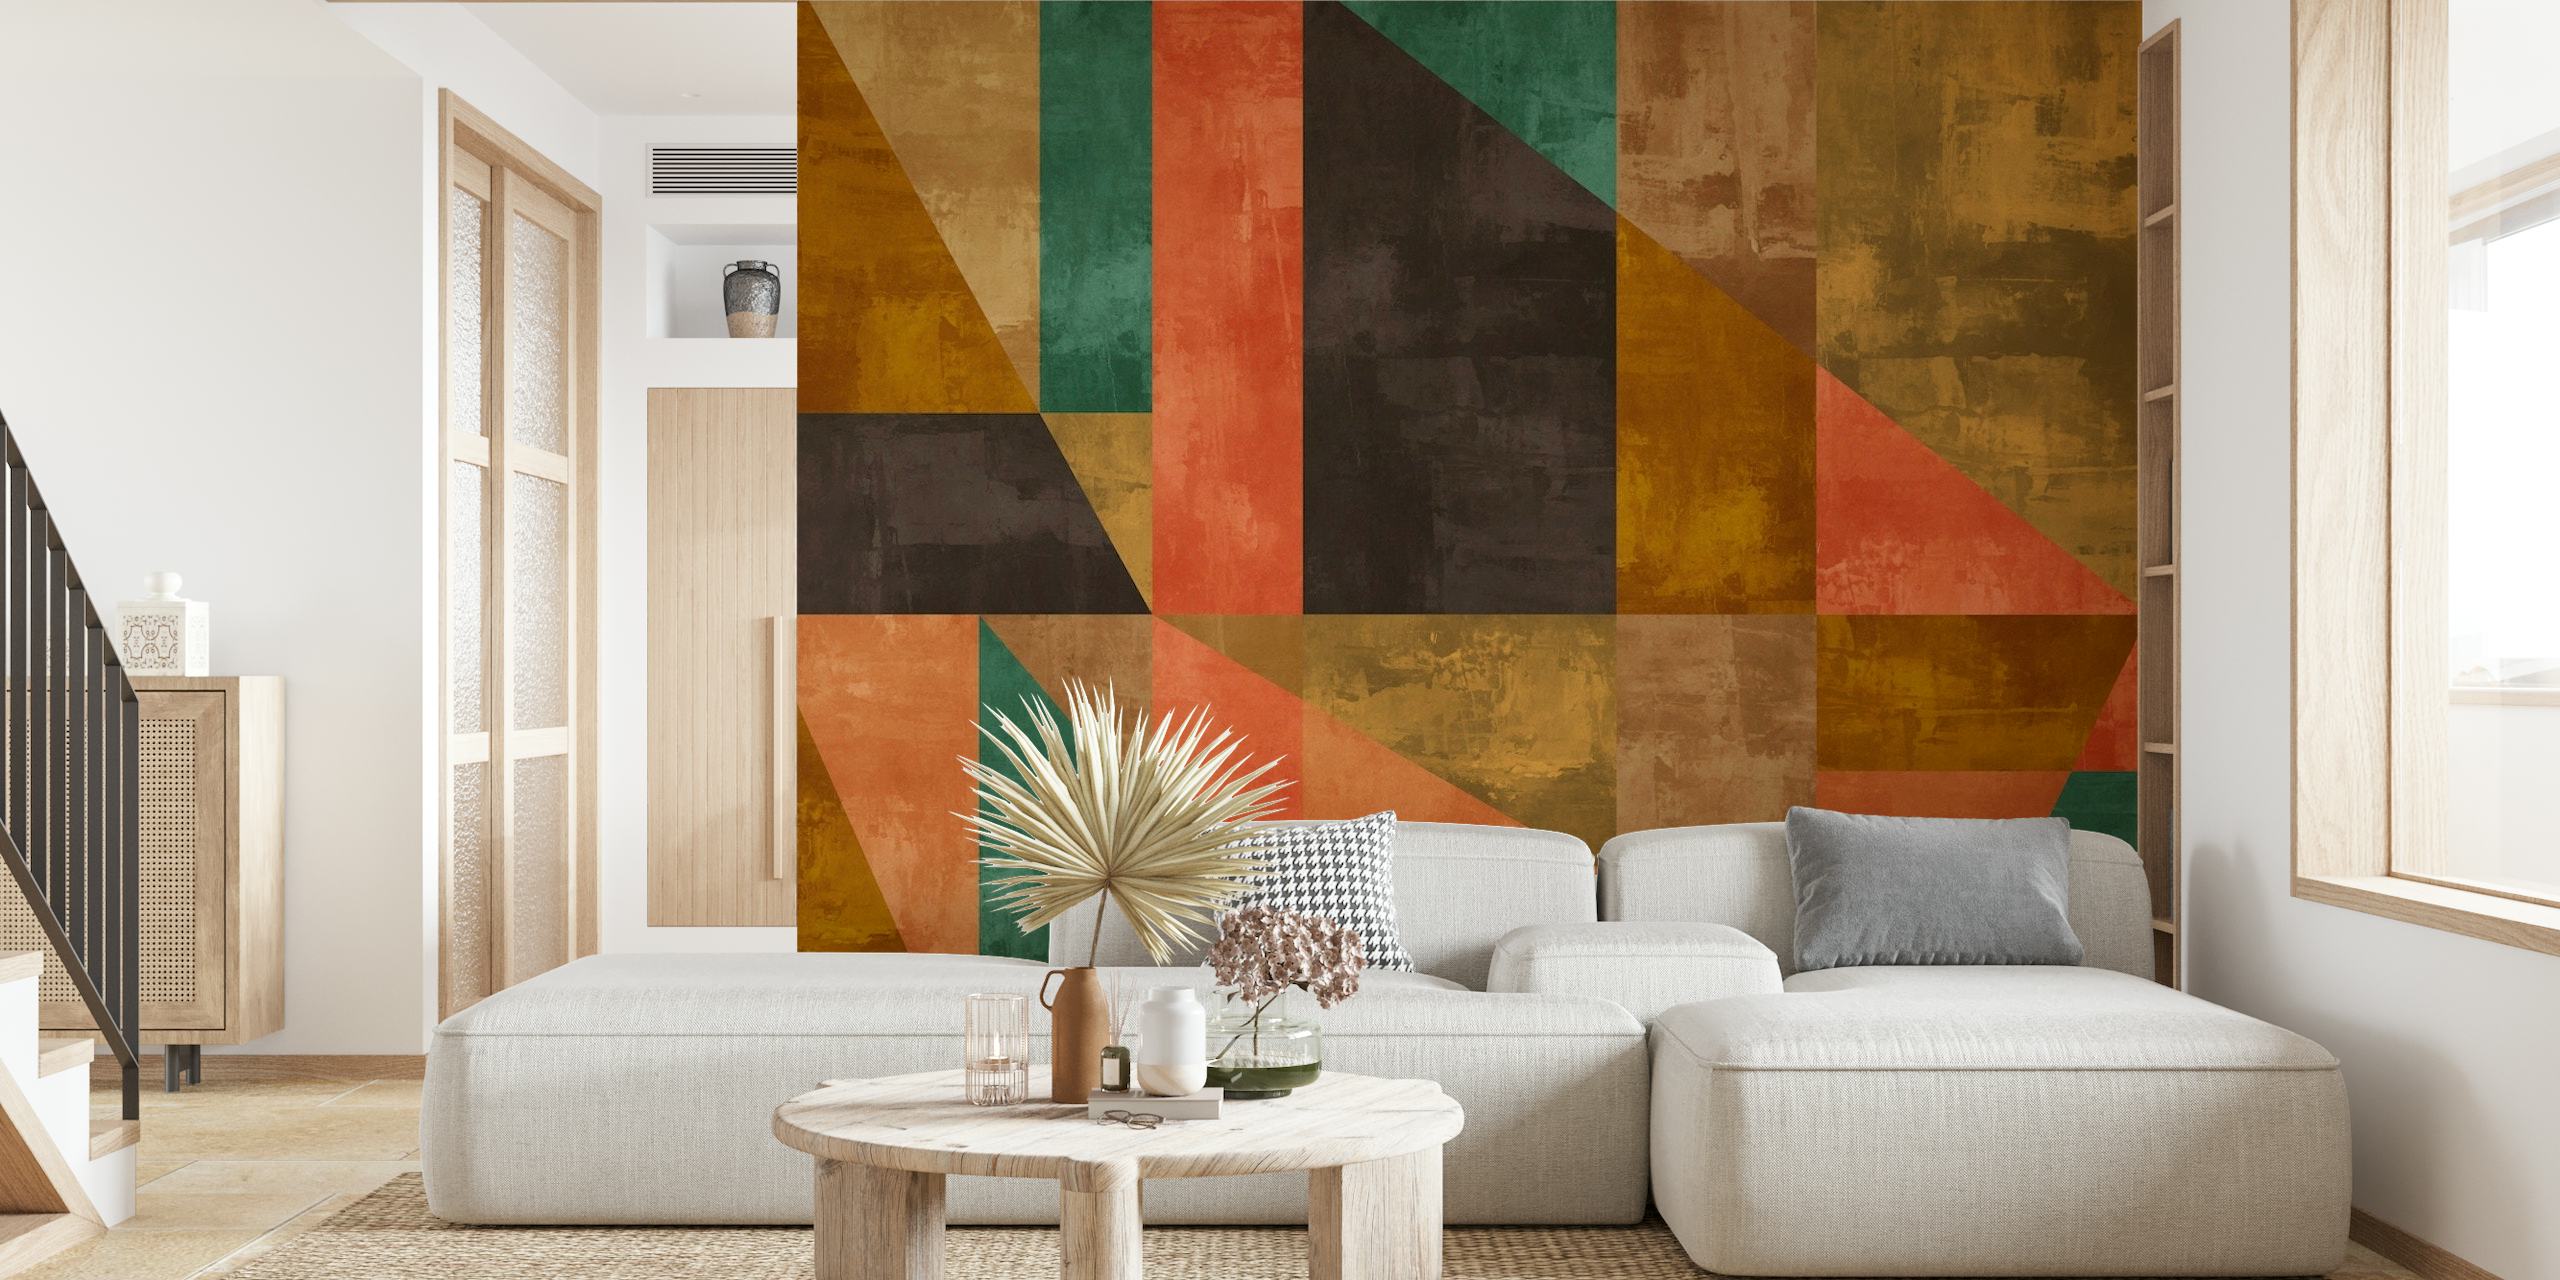 Abstract Rustic Painting wall mural featuring geometric shapes in earth tones and warm ambers